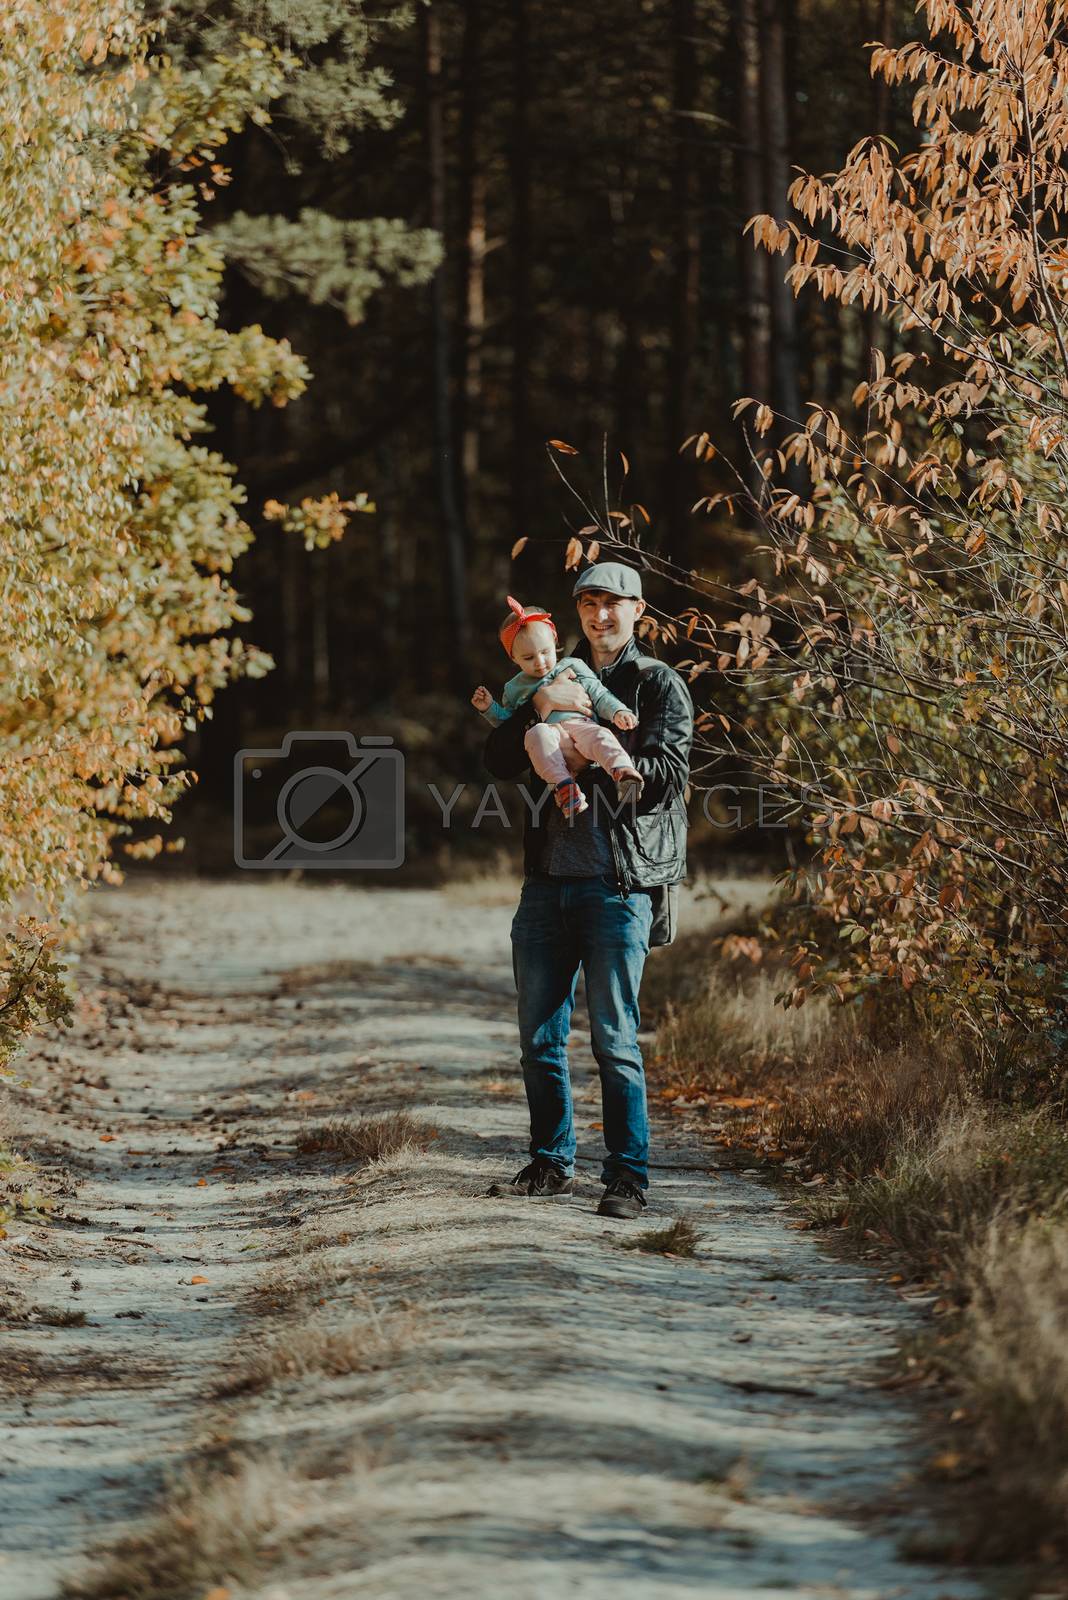 Royalty free image of Happy loving family. Father and his daughter child girl playing  by Brejeq